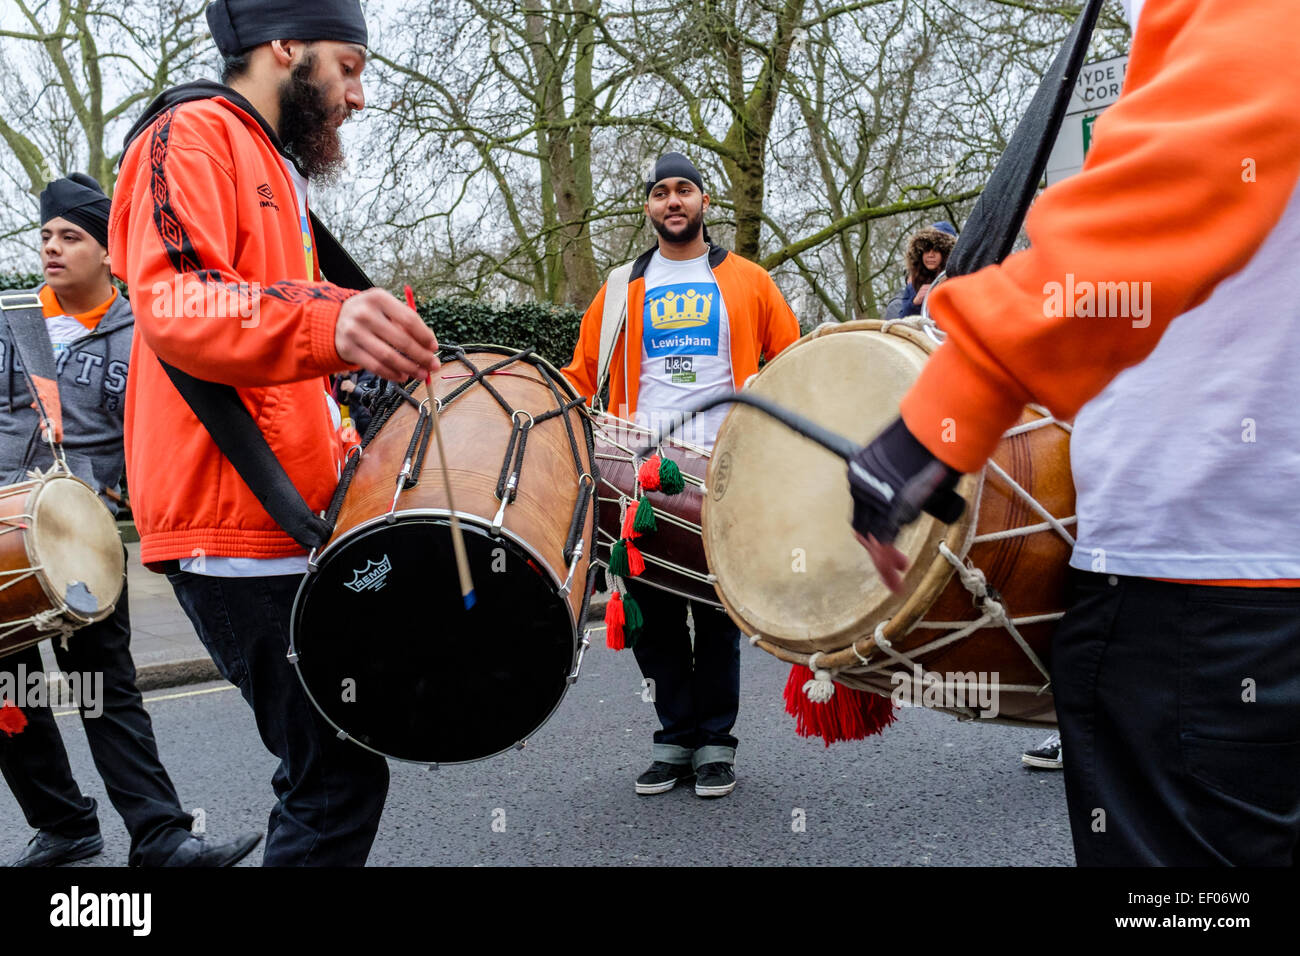 Drummers representing the Borough of Lewisham prepare to participate in London 2015 New Year's Day Parade Stock Photo